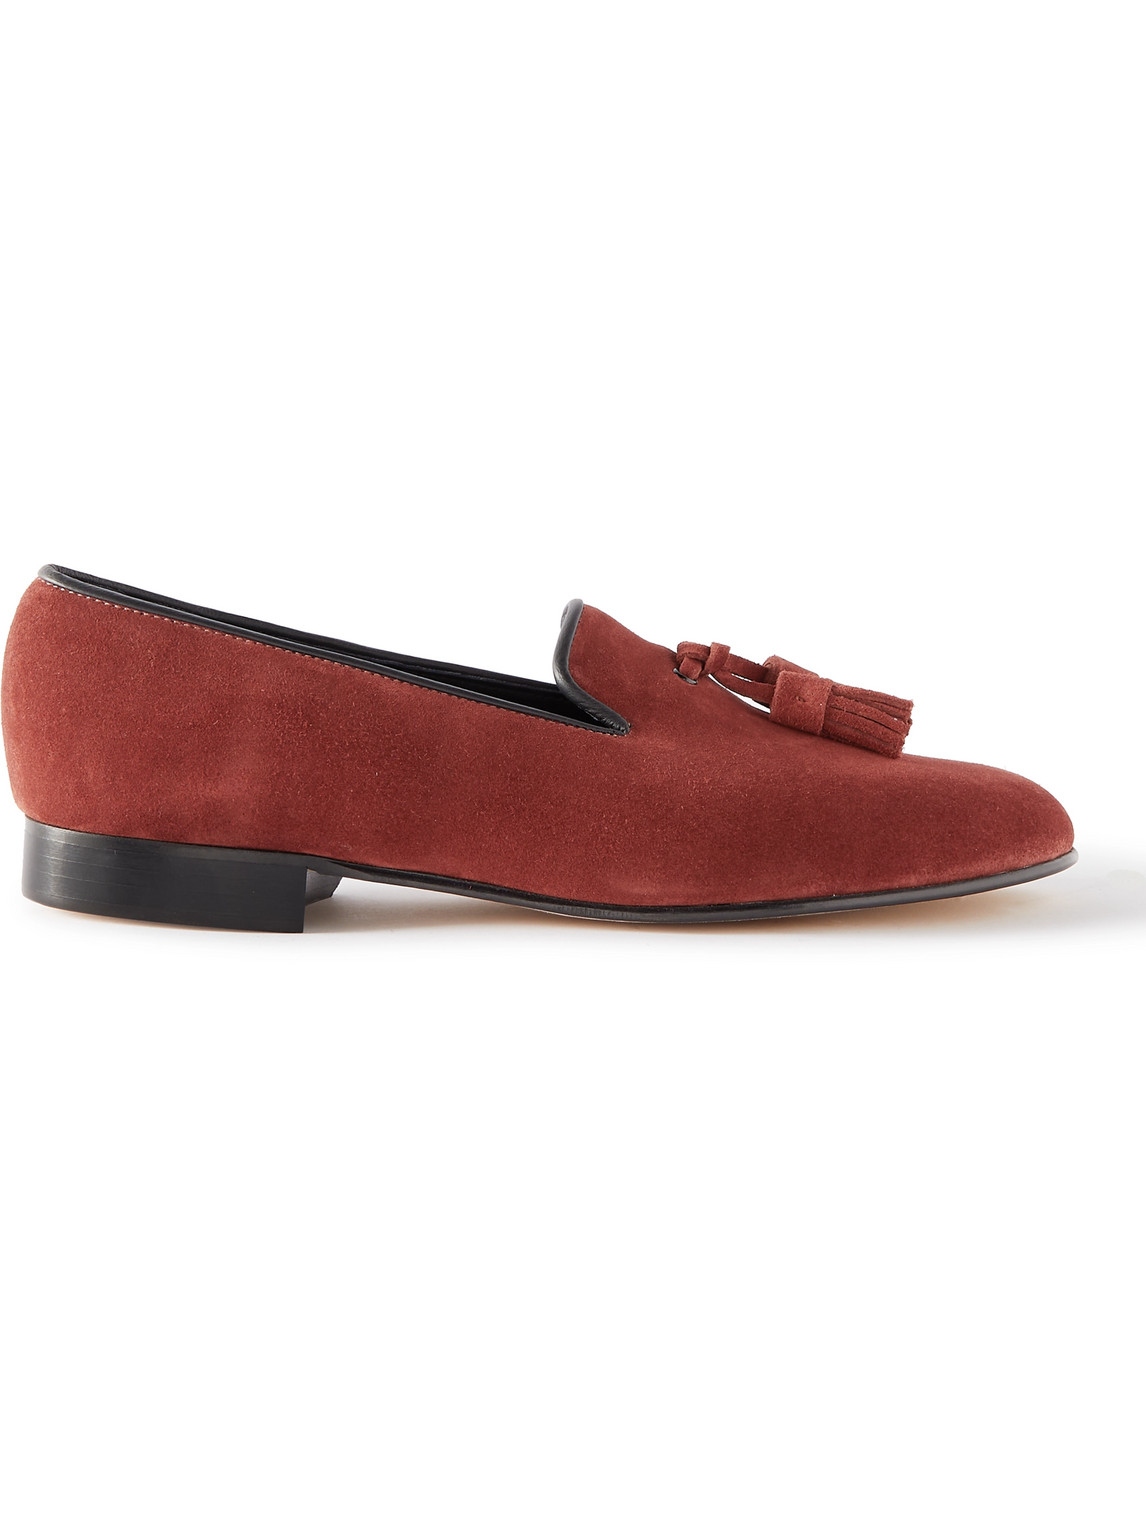 George Cleverley Eton Suede Tasseled Loafers In Red